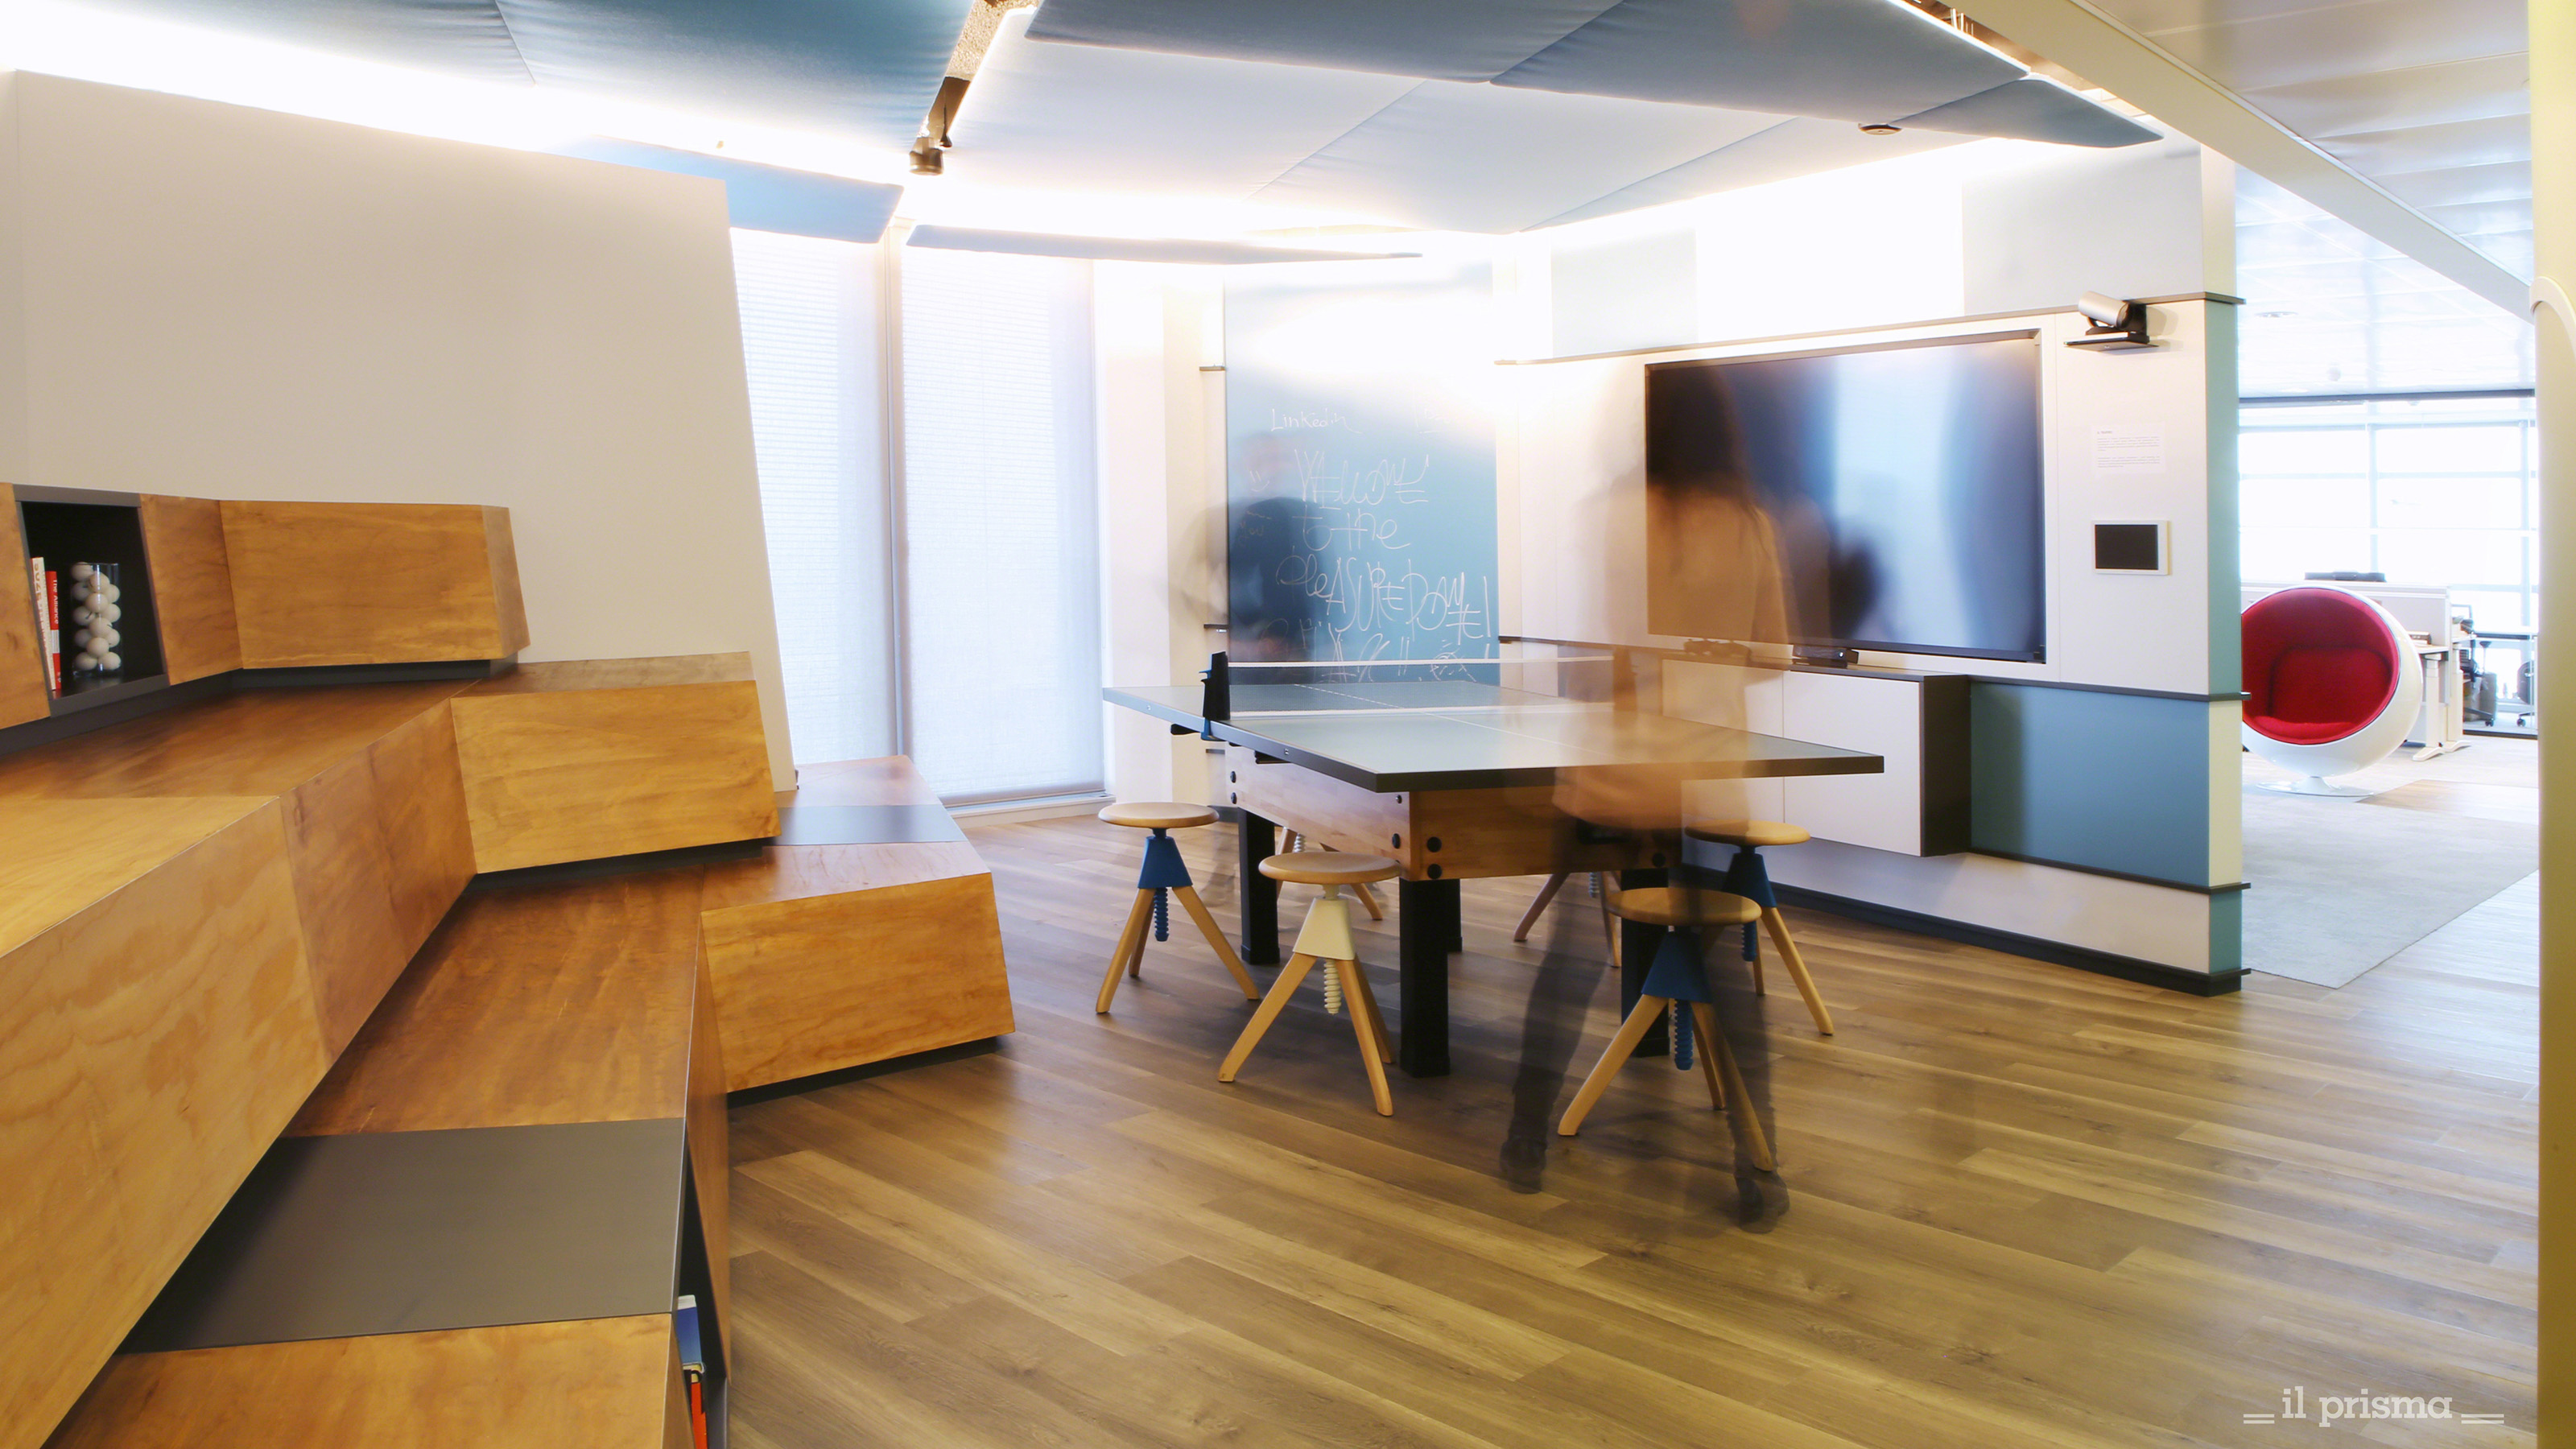 Gathering space at LinkedIn office in Milan, ping pong table and a big TV screen